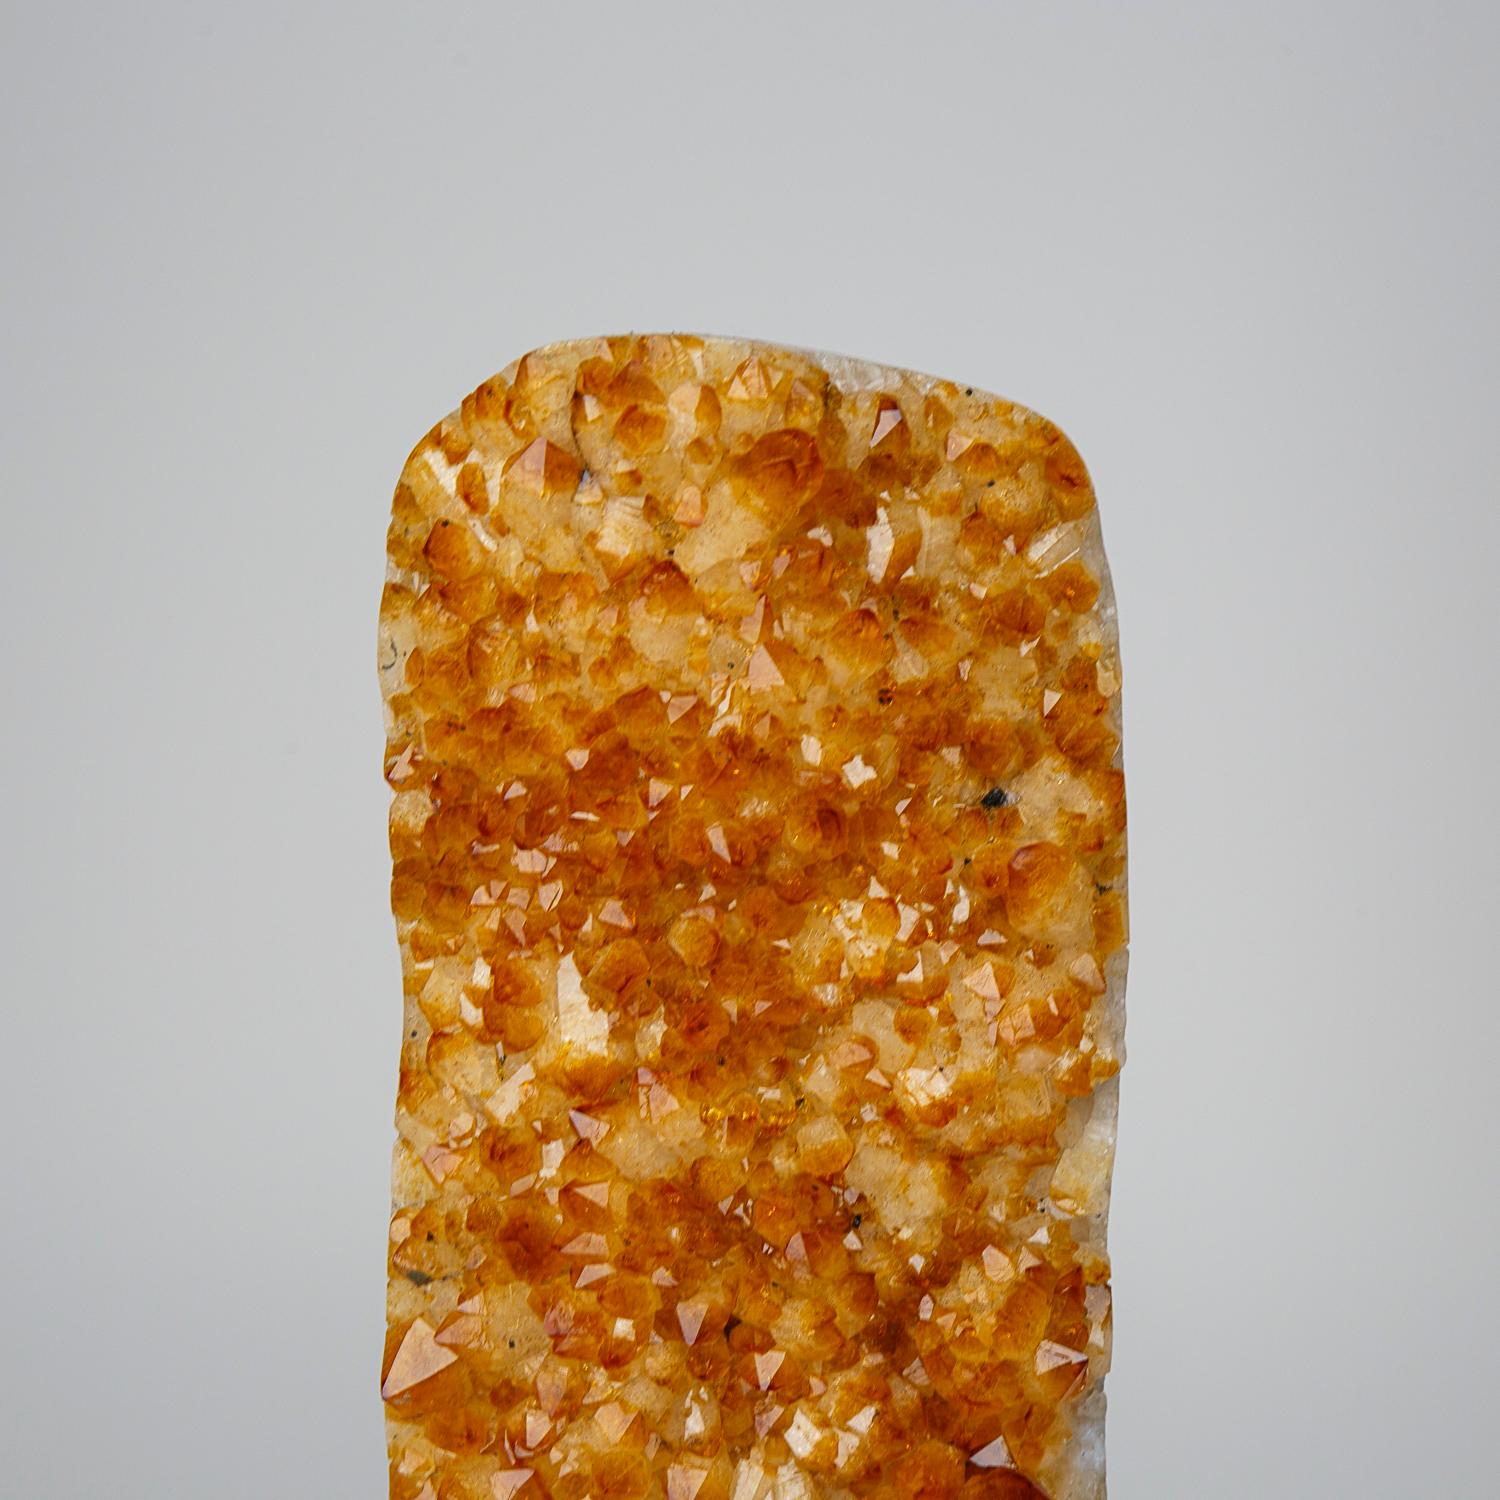 This 16.5 lb Genuine Citrine Quartz Crystal Cluster from Brazil is a remarkable beauty. The free-form cluster is adorned with perfectly shaped crystal points, displaying stunning hues of orange and yellow. Resting on a cement base, this mineral